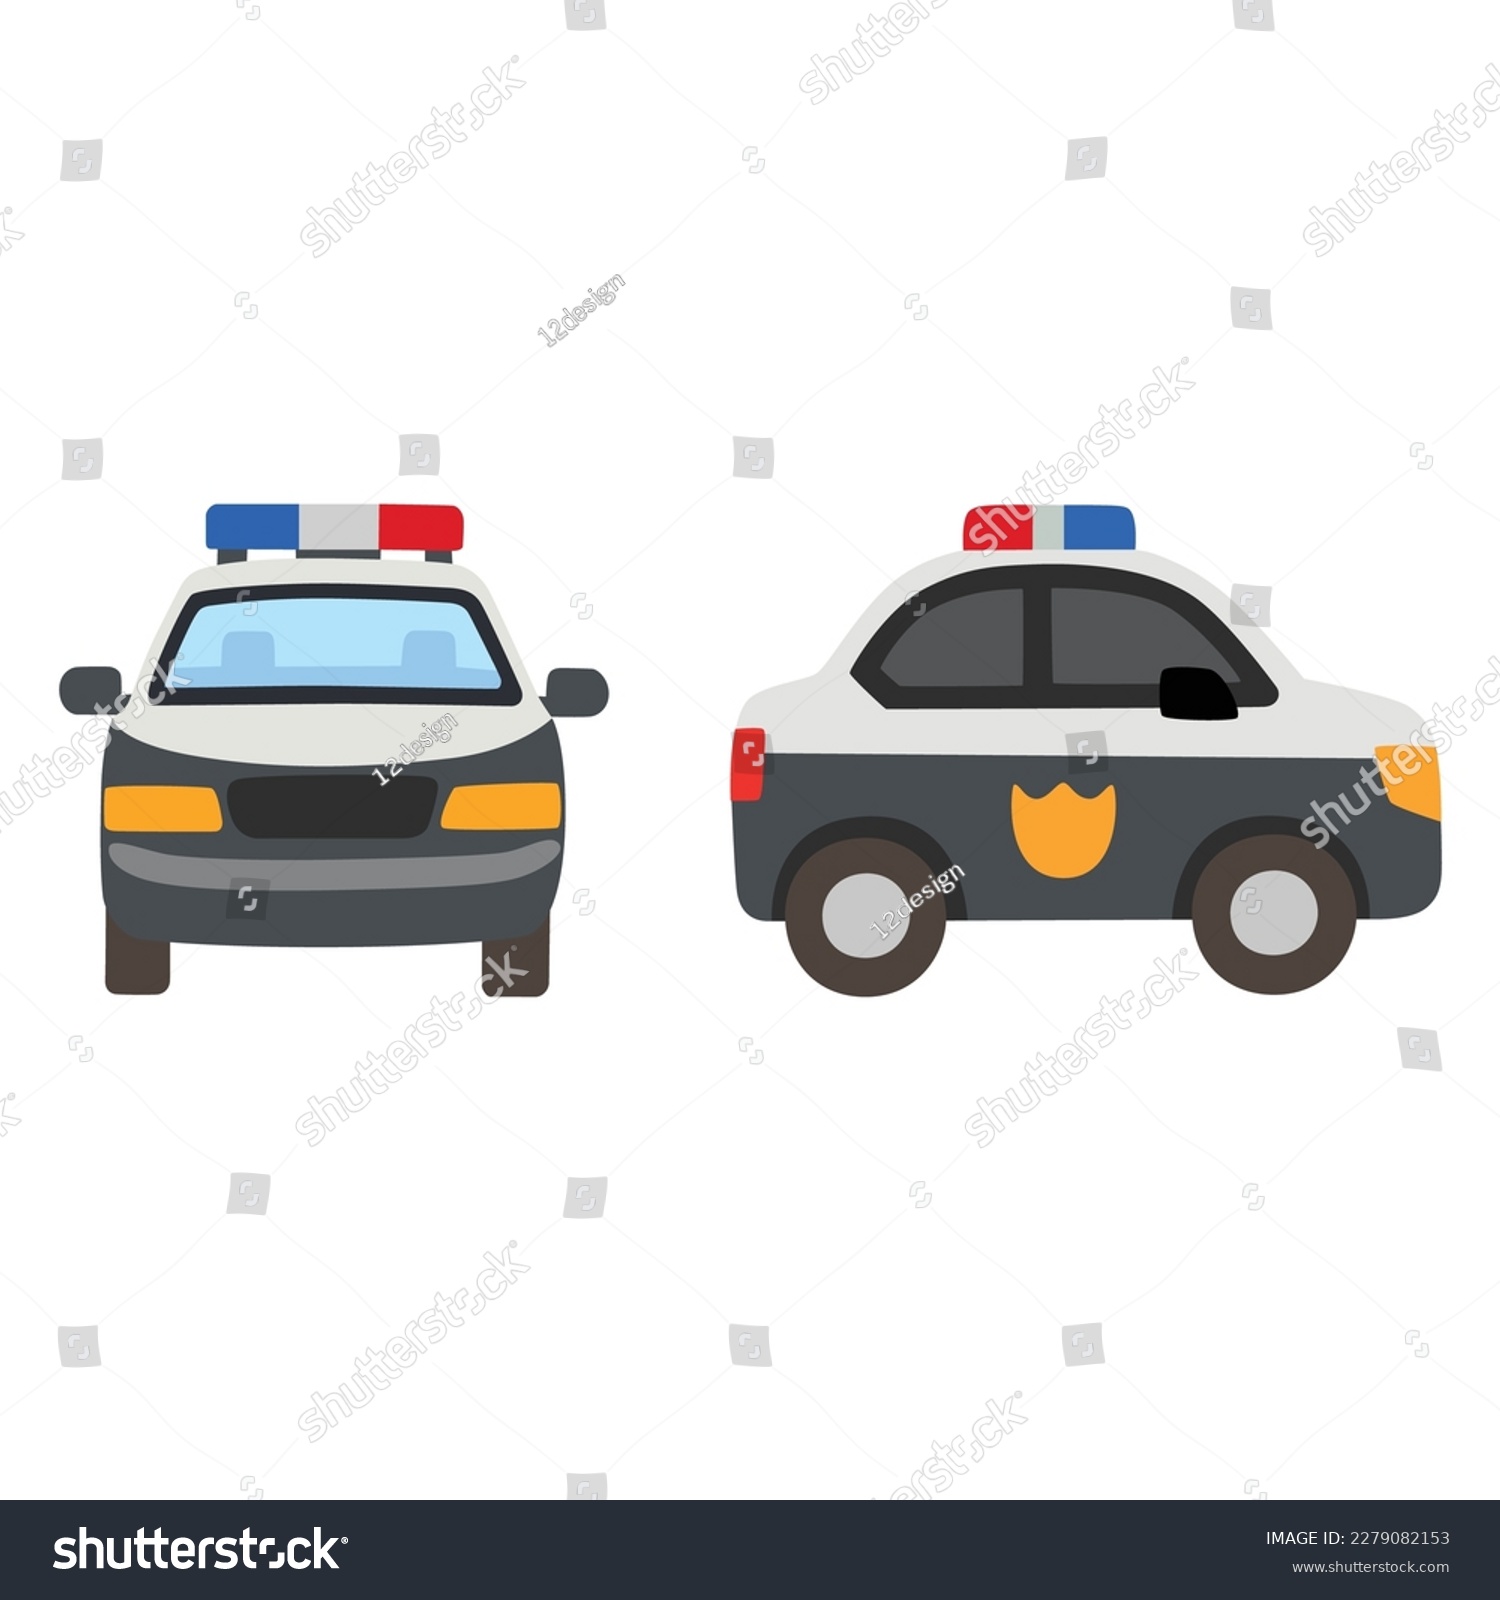 SVG of Police Car vector flat icon design. İsolated police car, with emergency light on the top sign design. svg